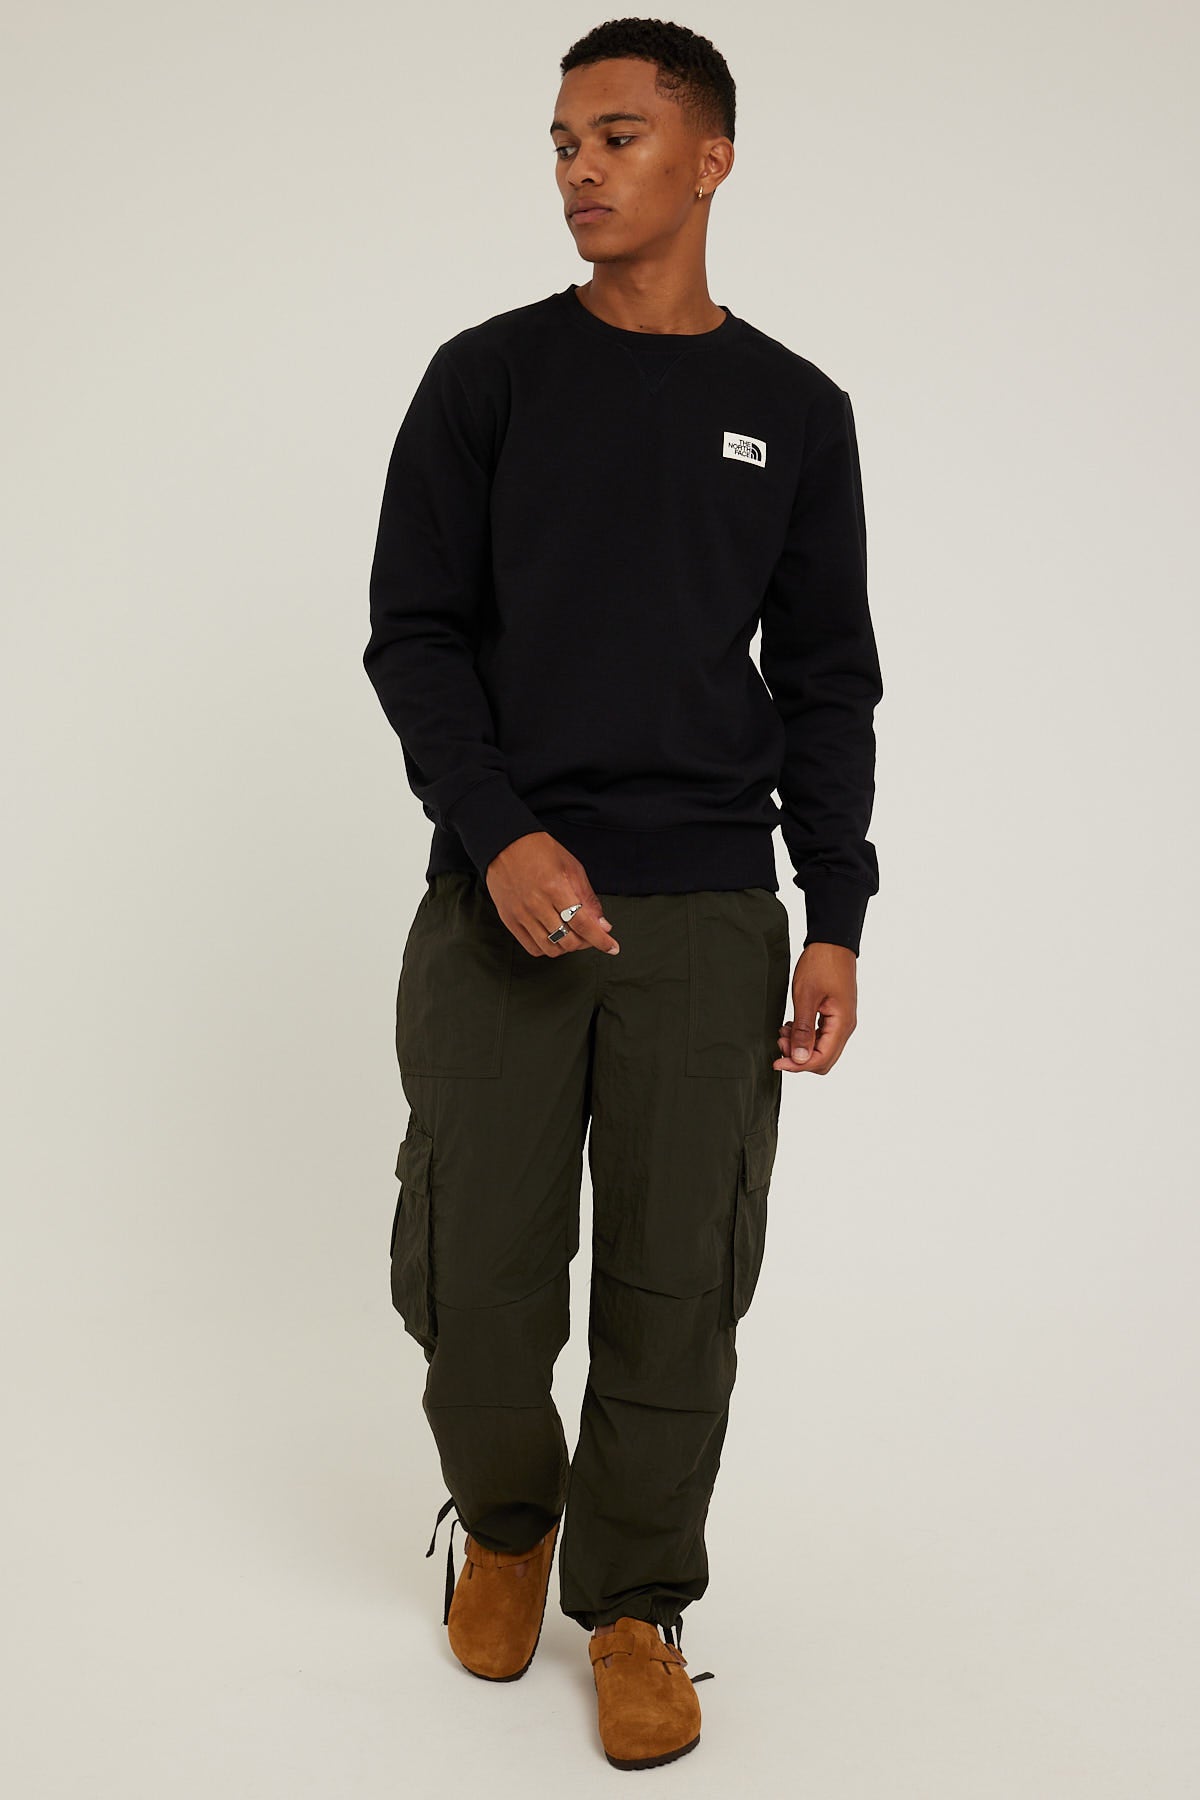 The North Face Heritage Patch Crew Black